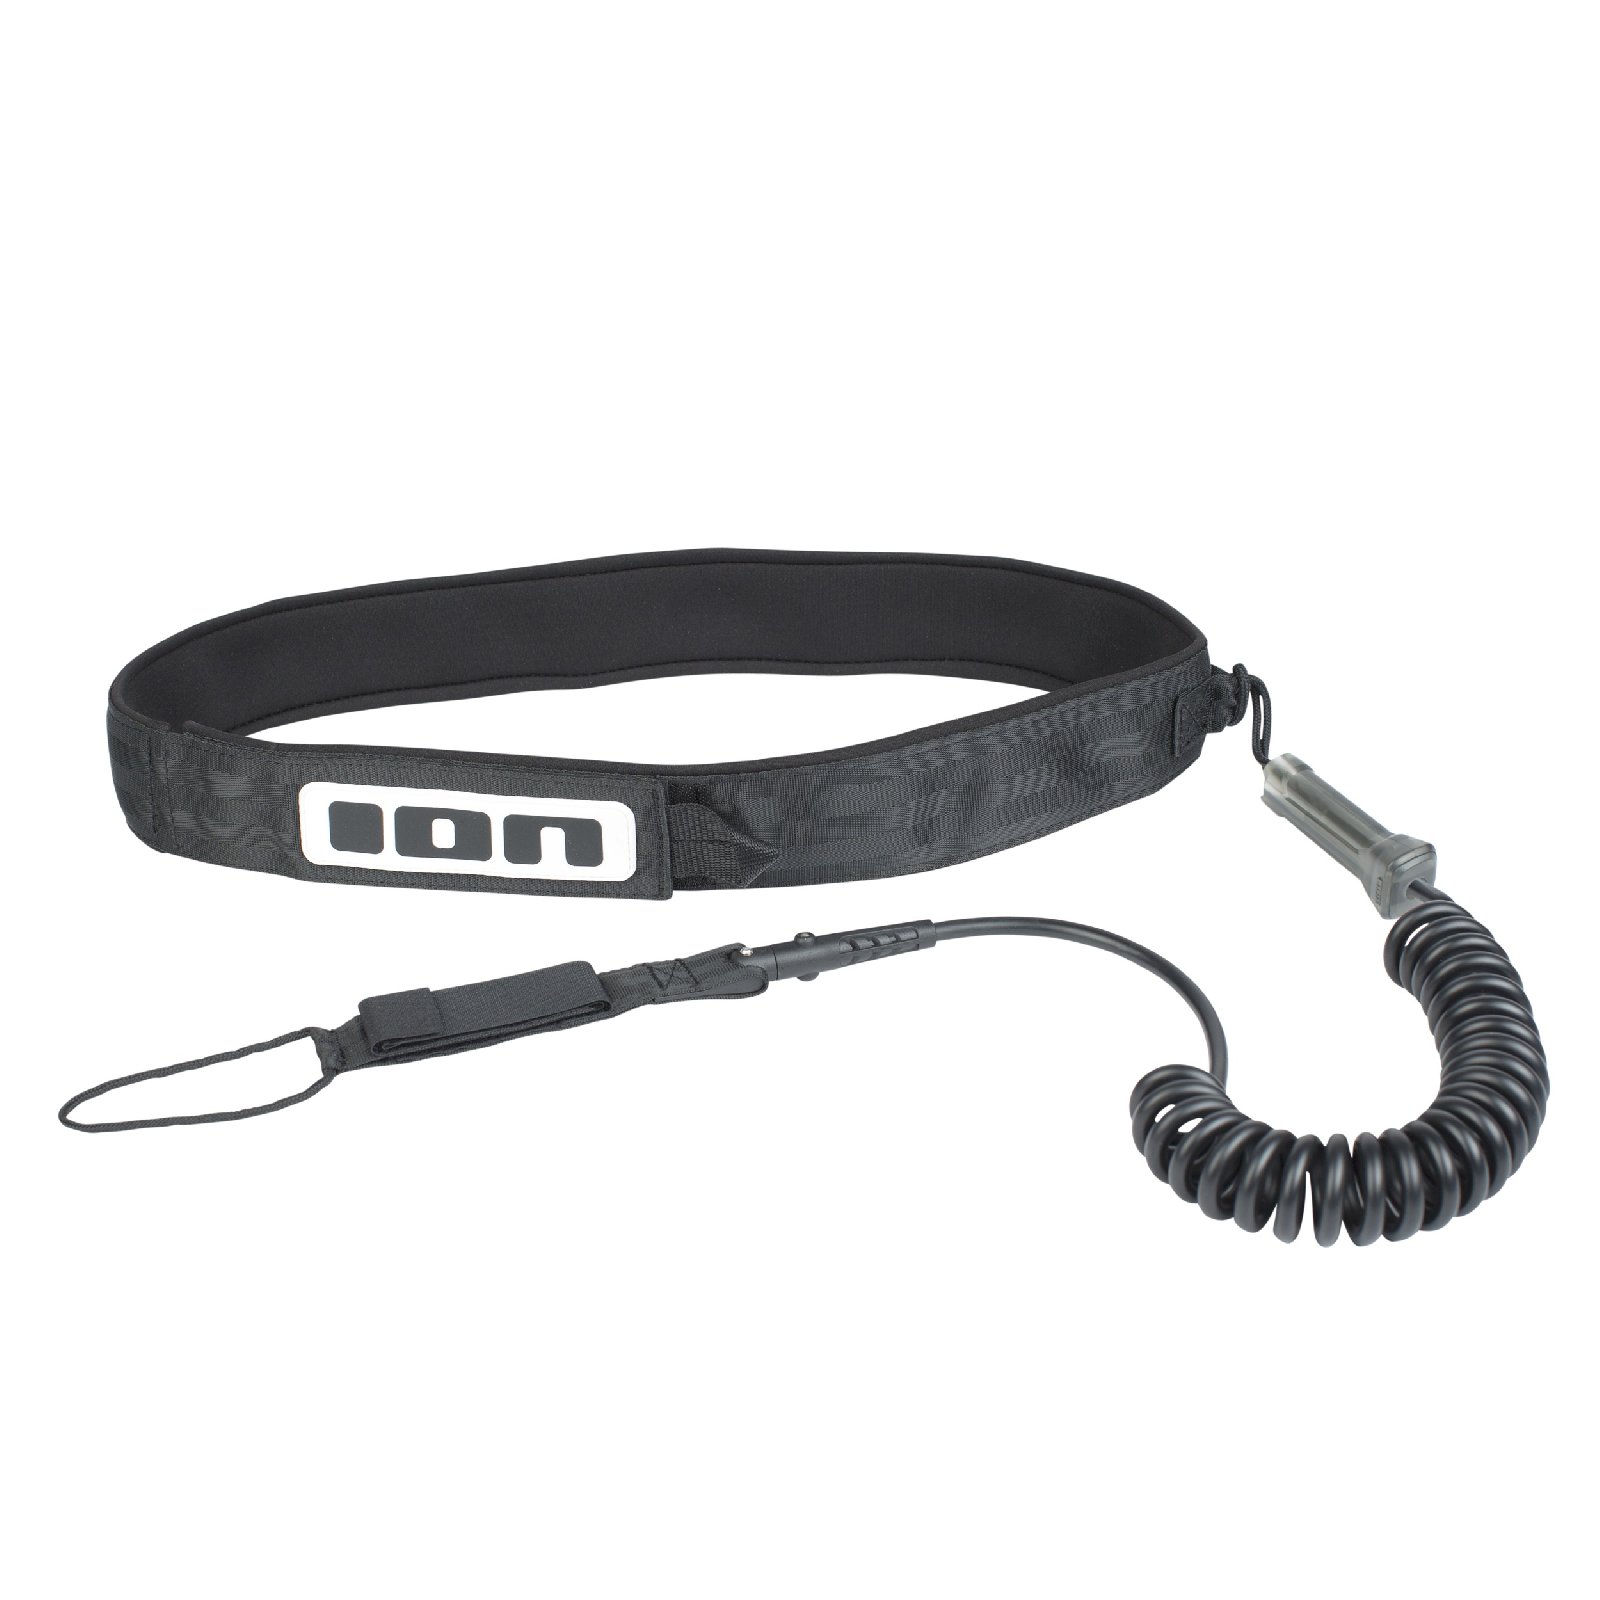 ION  SUP/WING Core Safety Leash incl. Hip Belt 8' (S-M)  (48700-7054)  23-